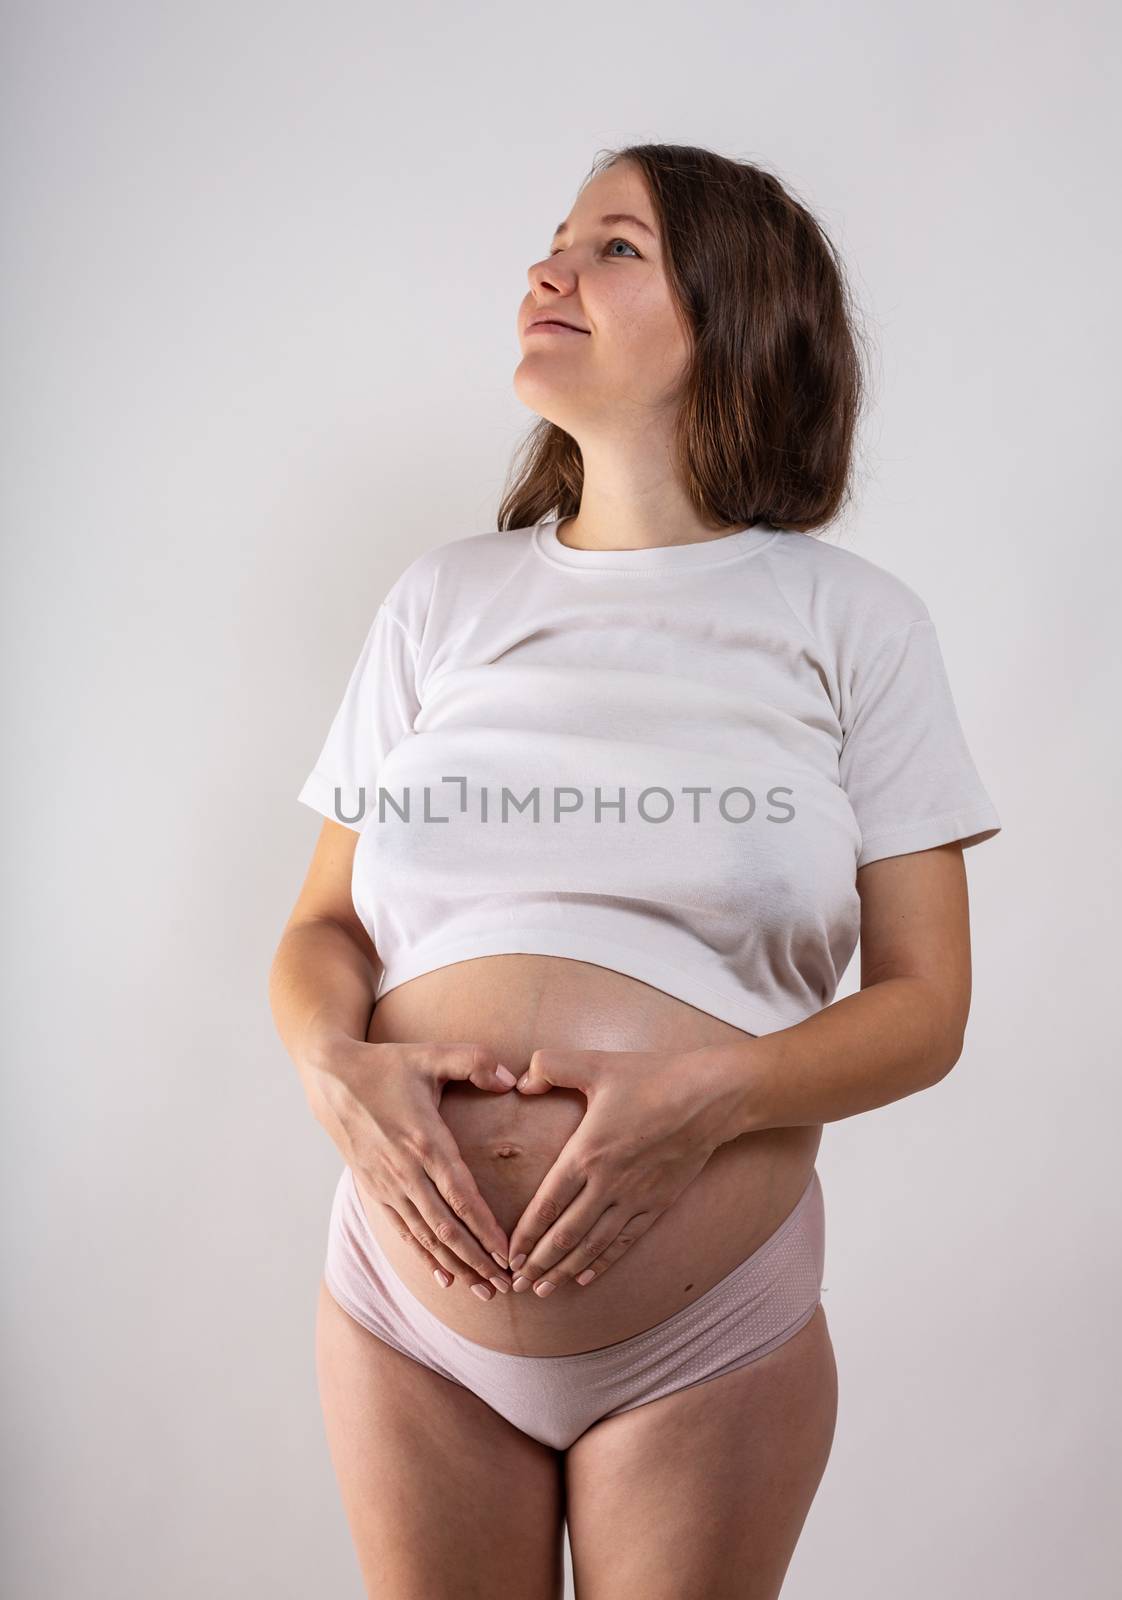 Young beautiful pregnant woman with long healthy curly hair posing in black underwear on grey background. Active pregnancy